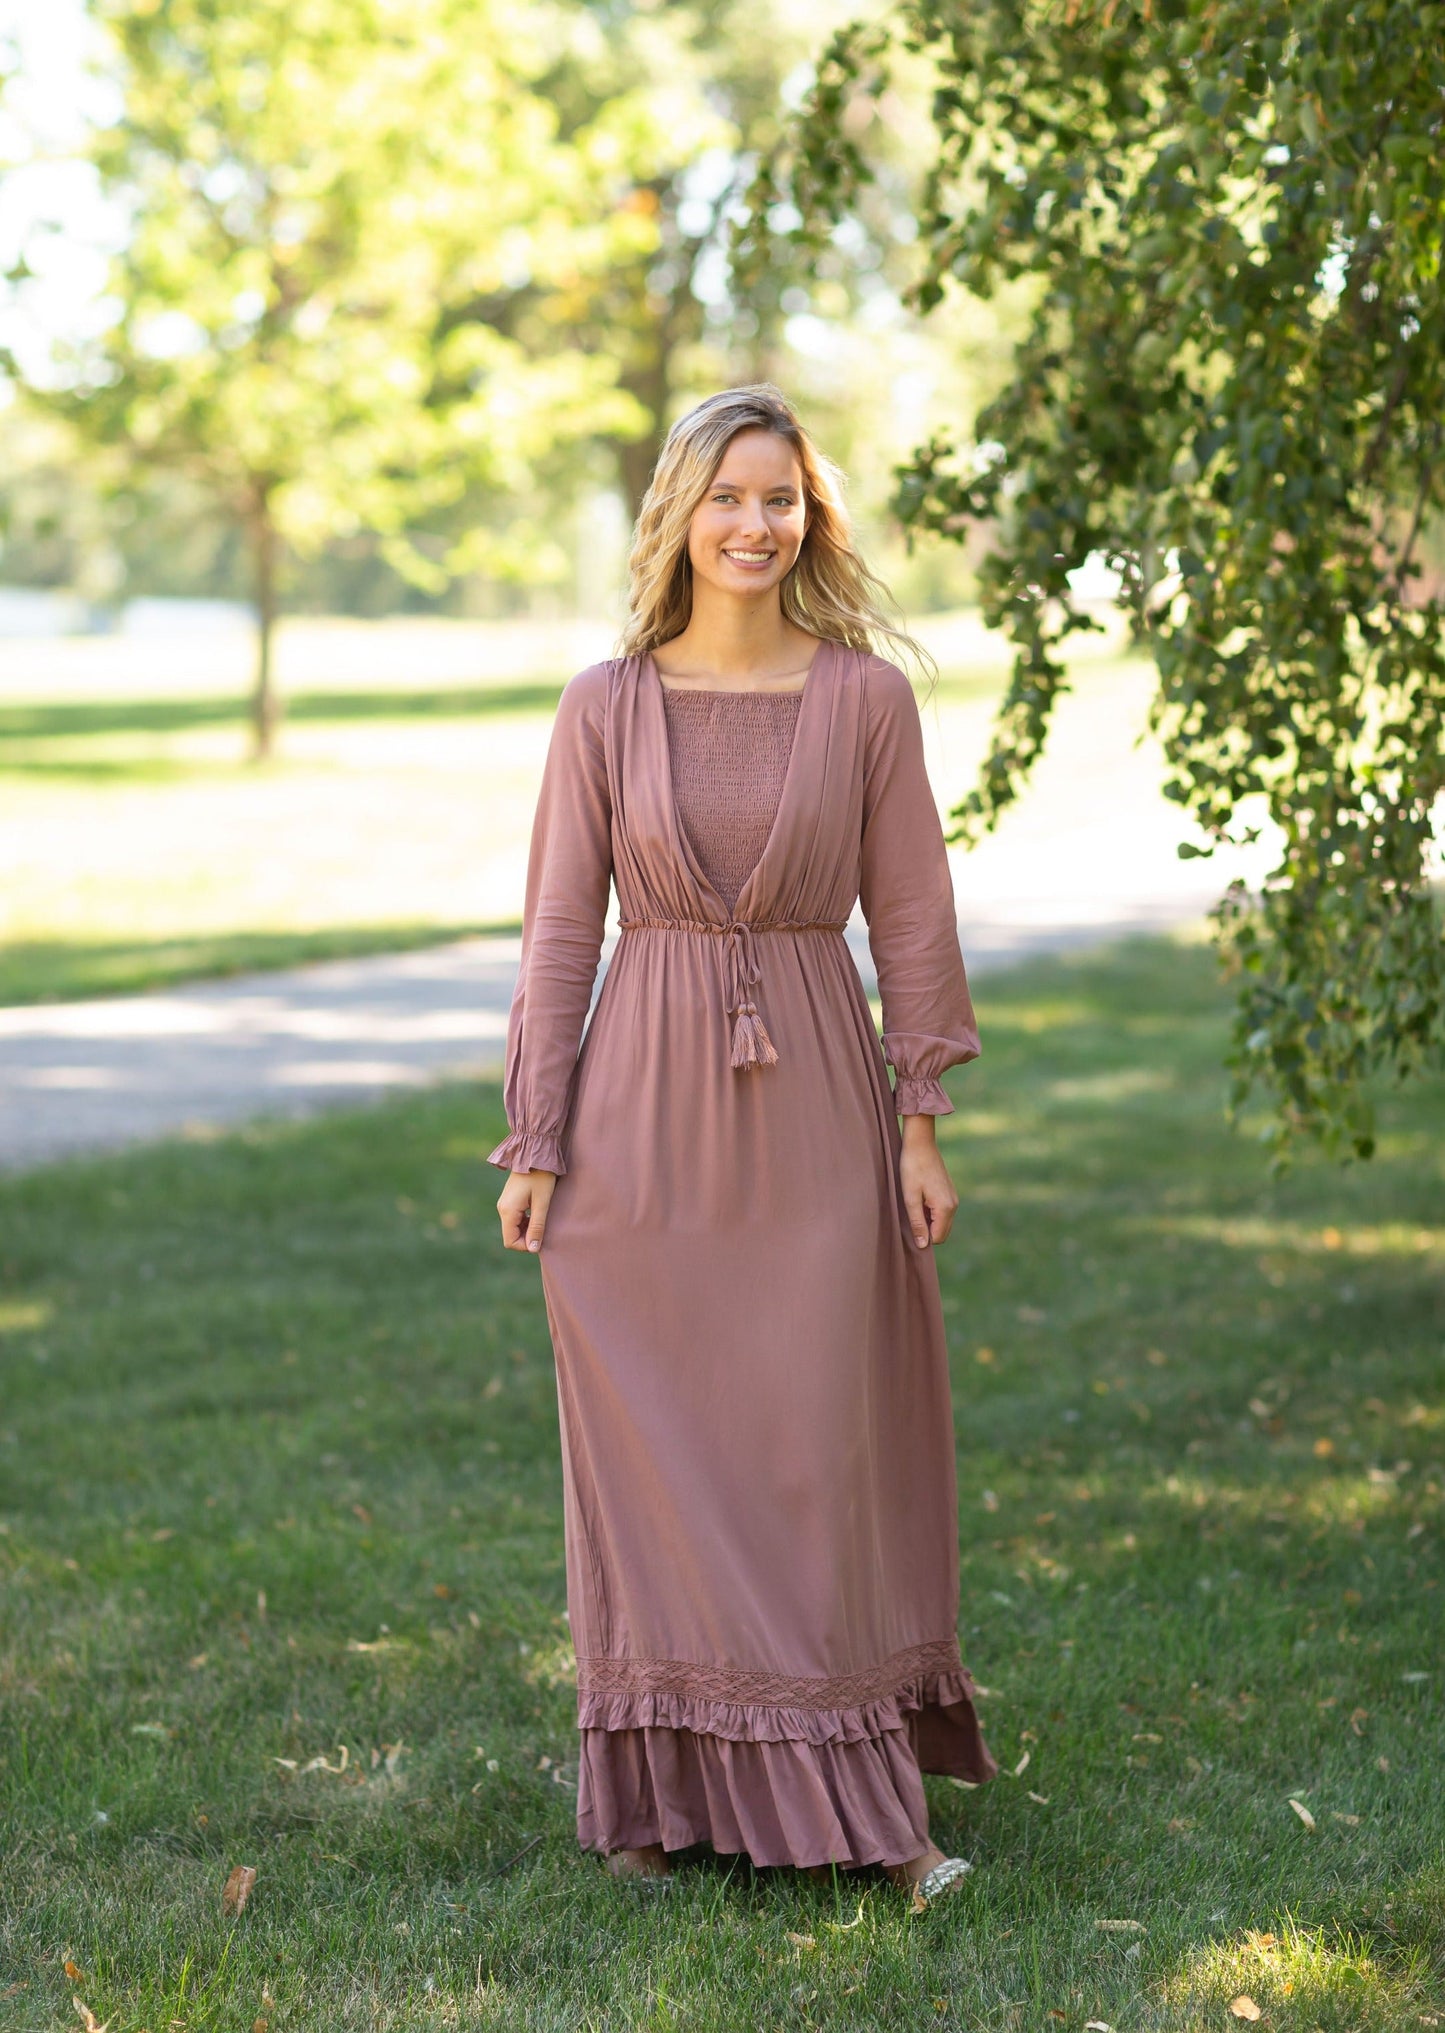 The Eve is an Inherit Design that is nursing friendly, has non functioning tie waist with tassels and is fully lined n a beautiful dusty mauve color. It is long sleeves and is a true maxi dress.